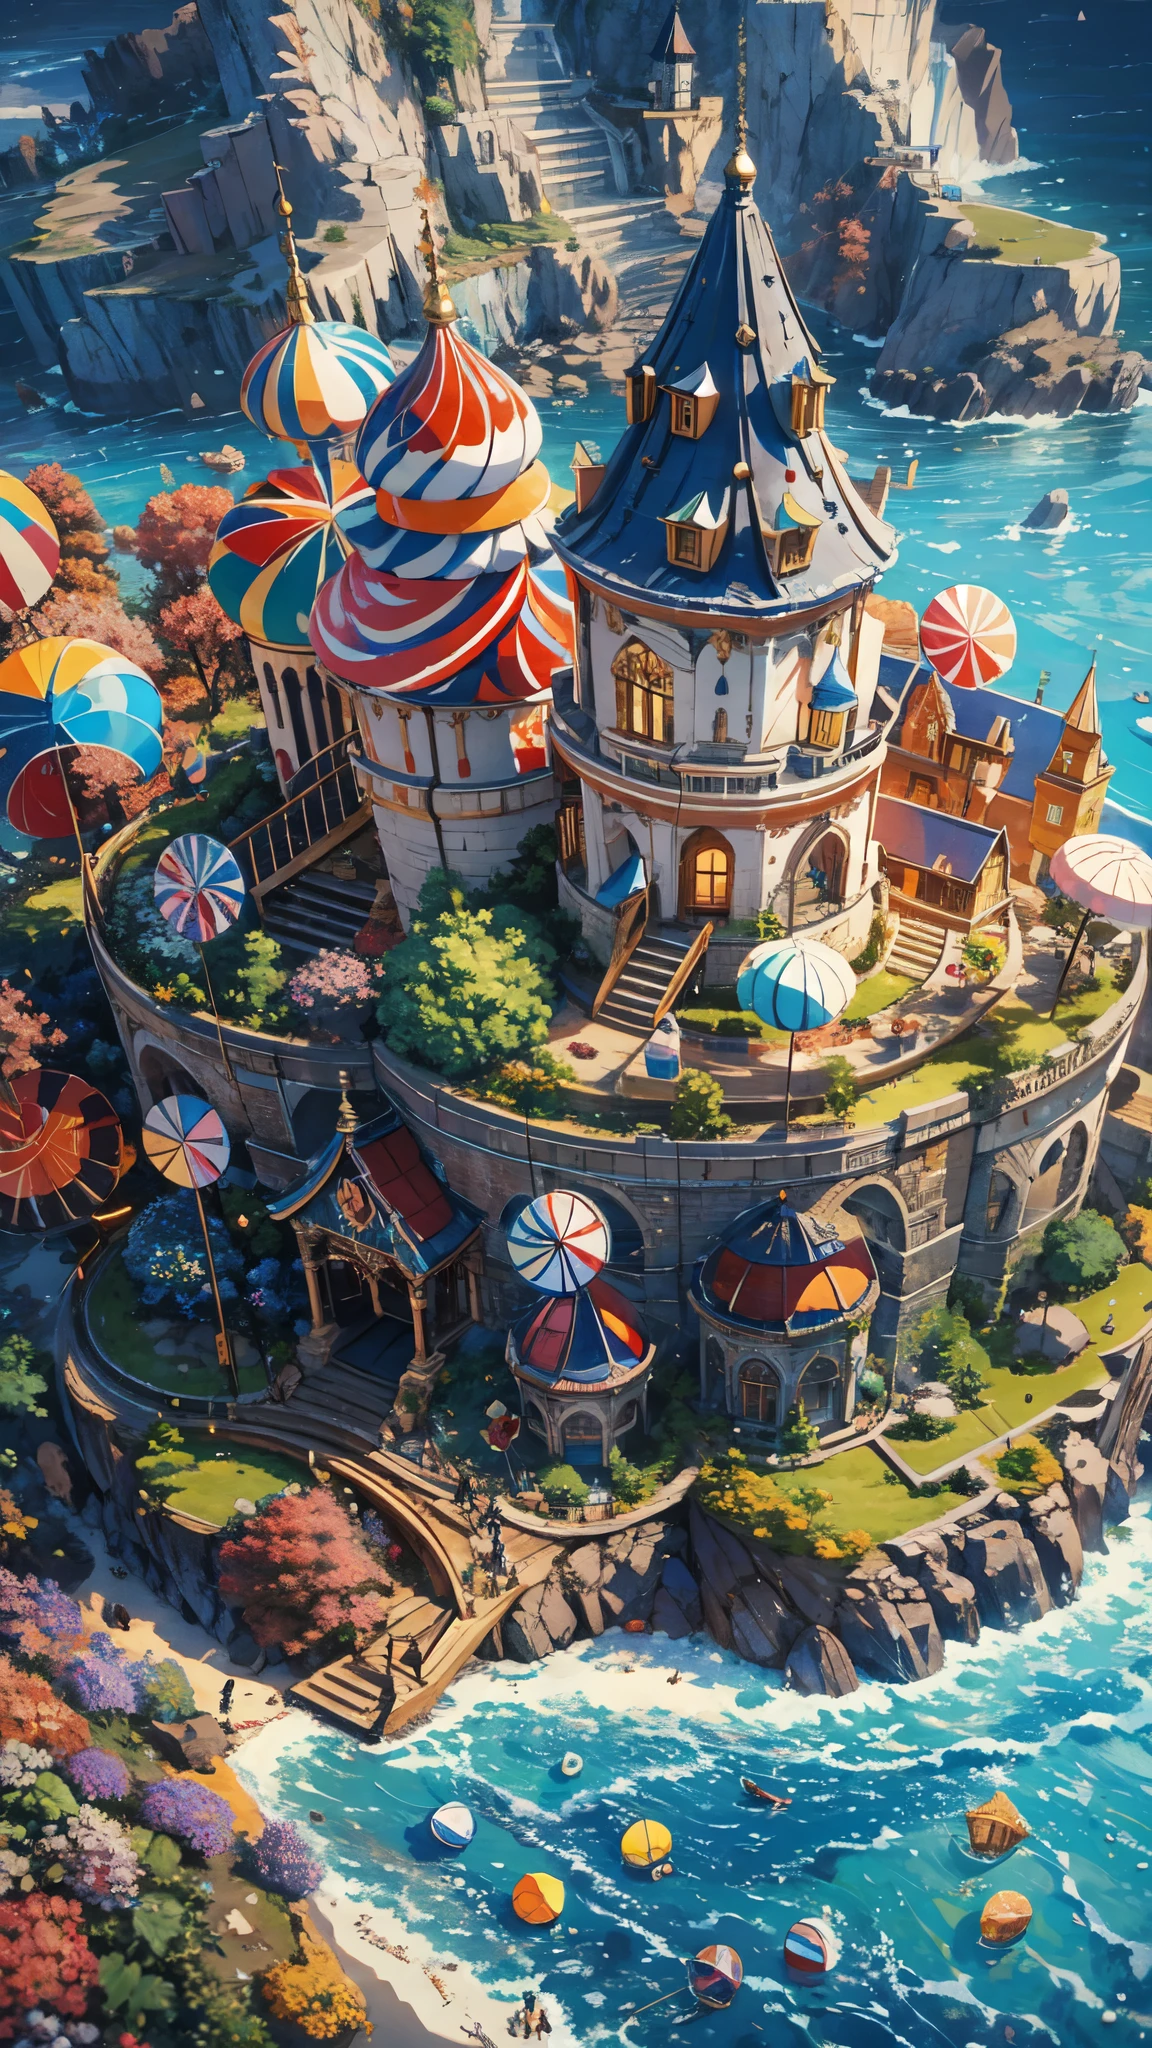 70 mm lens, cinematic shot, centered, perfect angle, {isometric island kingdom full of sweets and cakes (lollipop, whipped cream), middle of the ocean, celebration, fantasy, surreal, epic fantasy, dreamland}, children dream, (Detailed, finest detailed, ultra detailed, intricate), vibrant color, volumetric lighting, dynamic lighting, depth of field, hard shadow, reflection, sharp focus, HD, UHD, 64K, 128K, masterpiece, professional work.